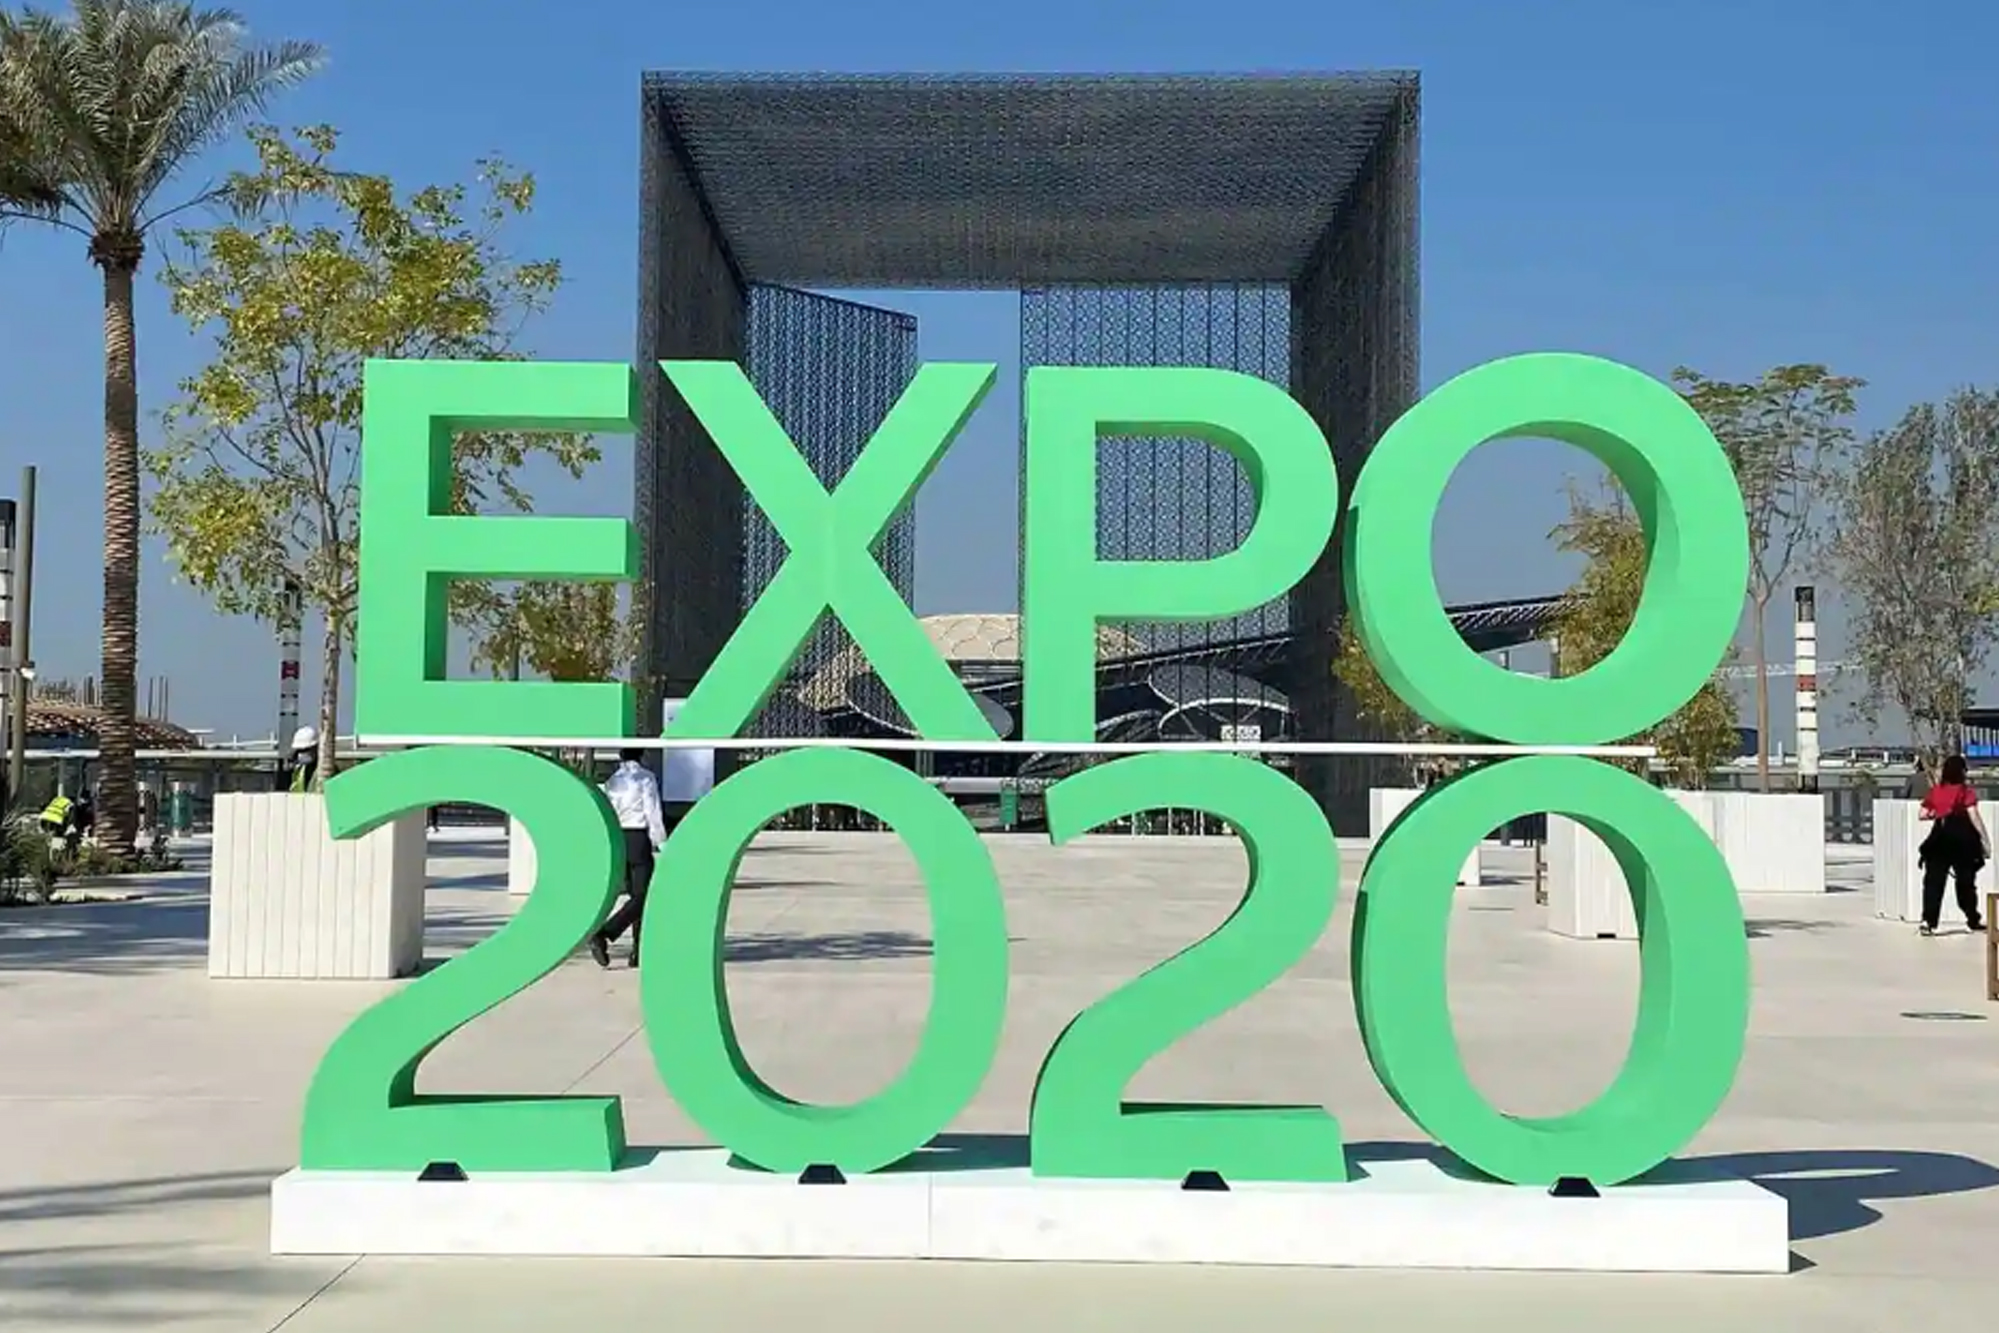 business and investment opportunities EXPO 2020